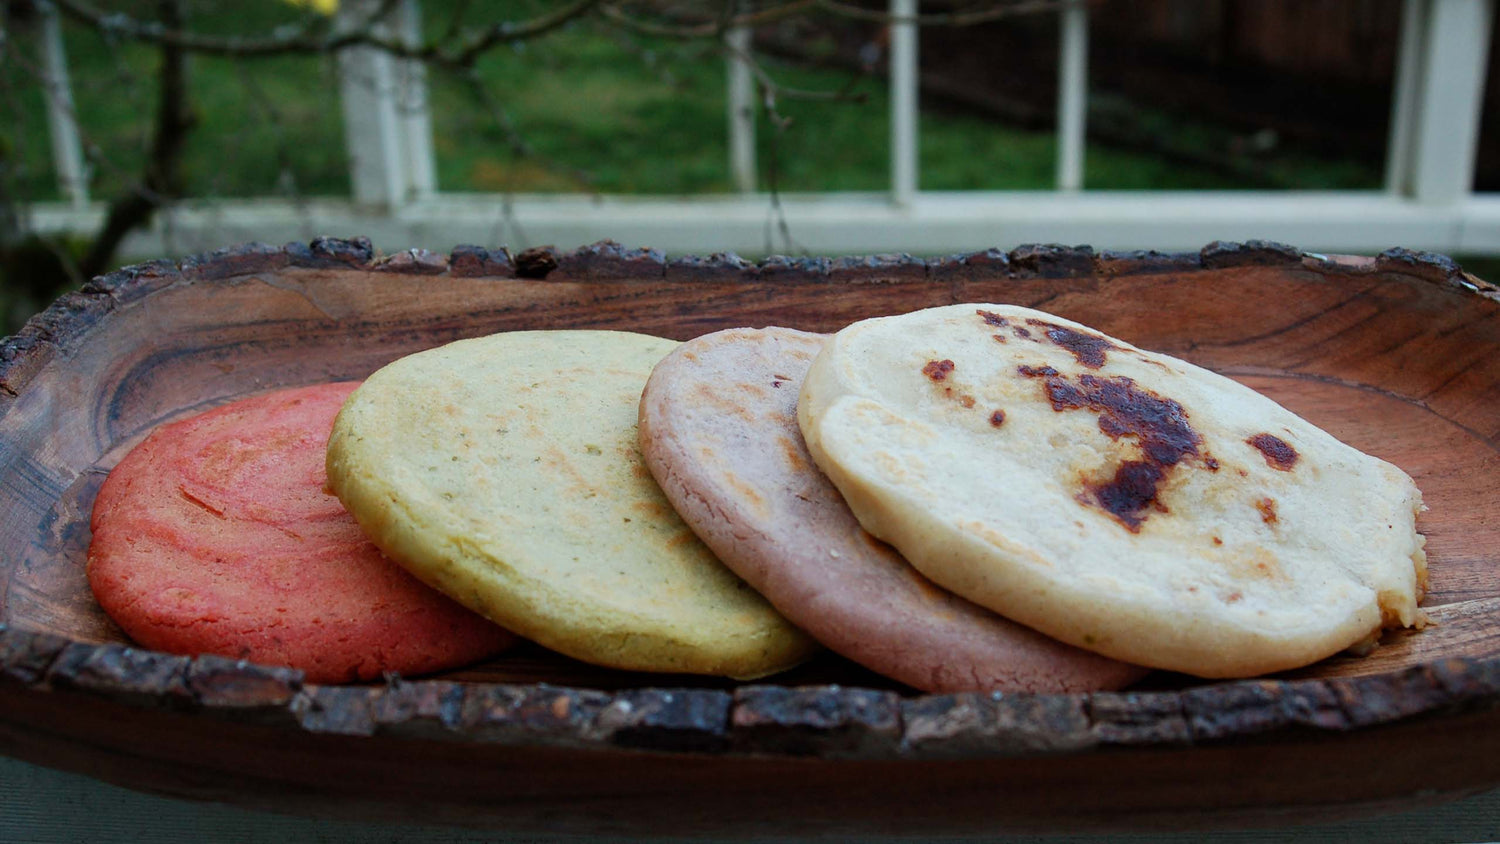 Xinca Foods. Try our different pupusas fillings which come in different colors.